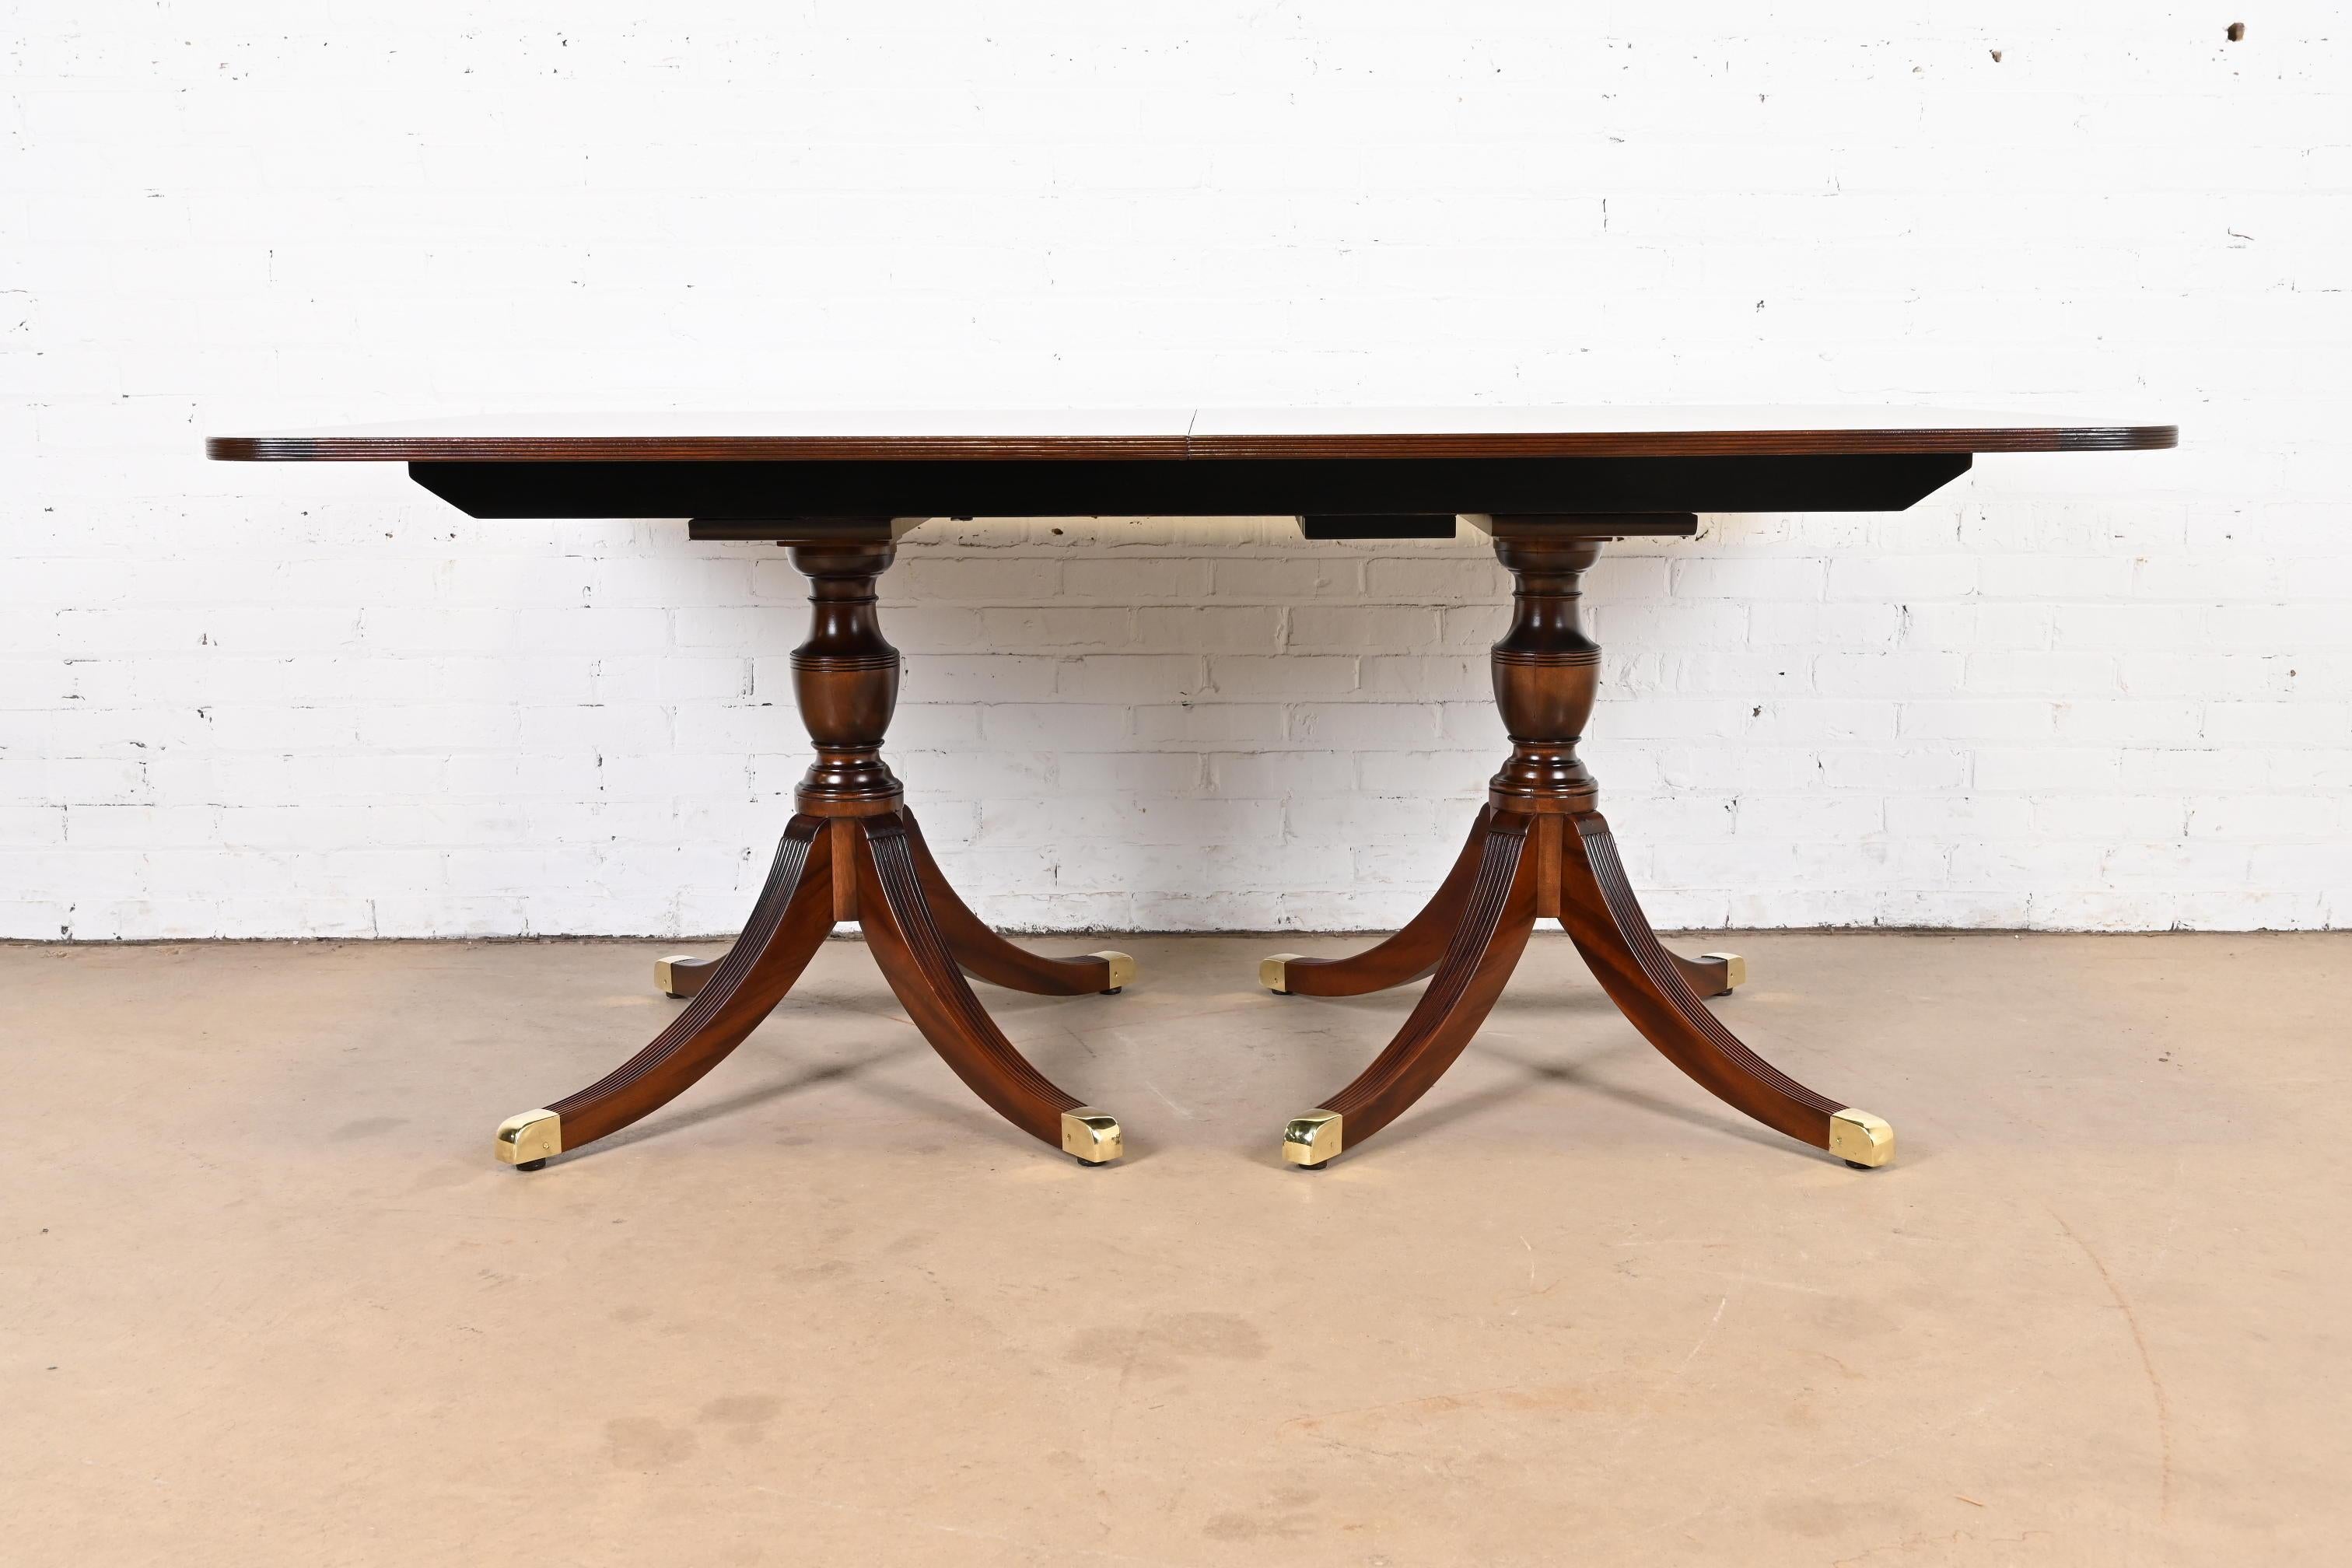 Baker Furniture Style Georgian Mahogany Double Pedestal Dining Table, Refinished 1